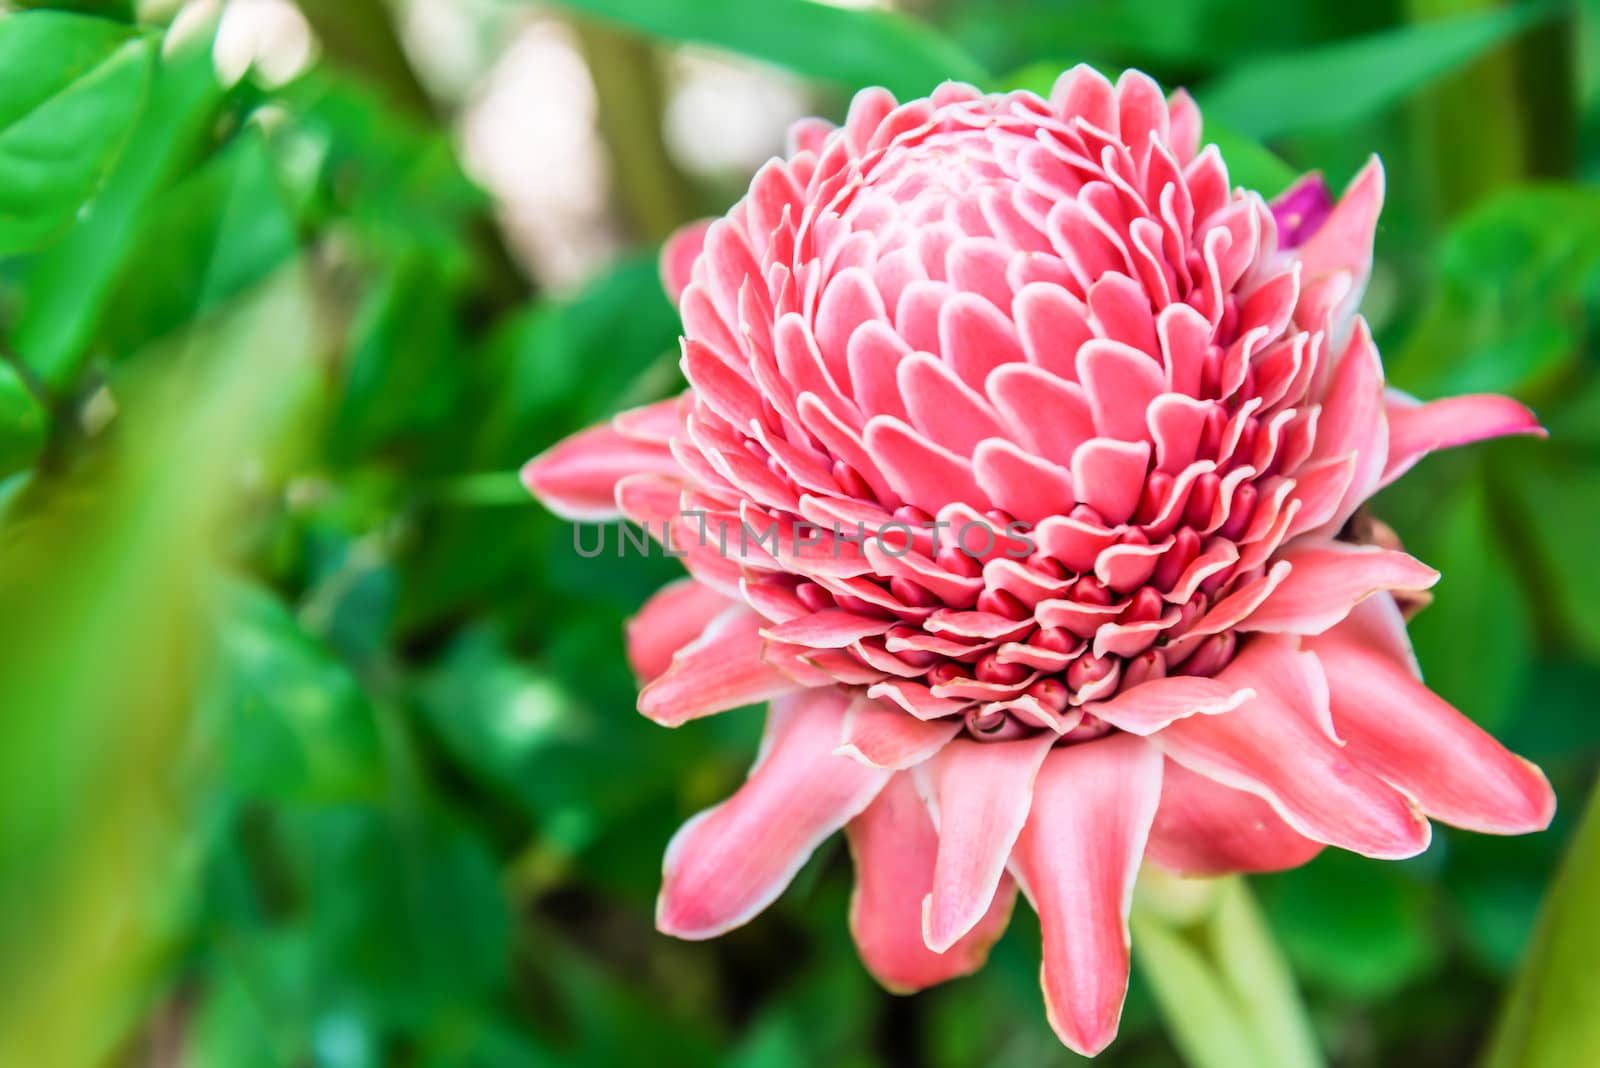 torch ginger against lush tropical growth by wmitrmatr